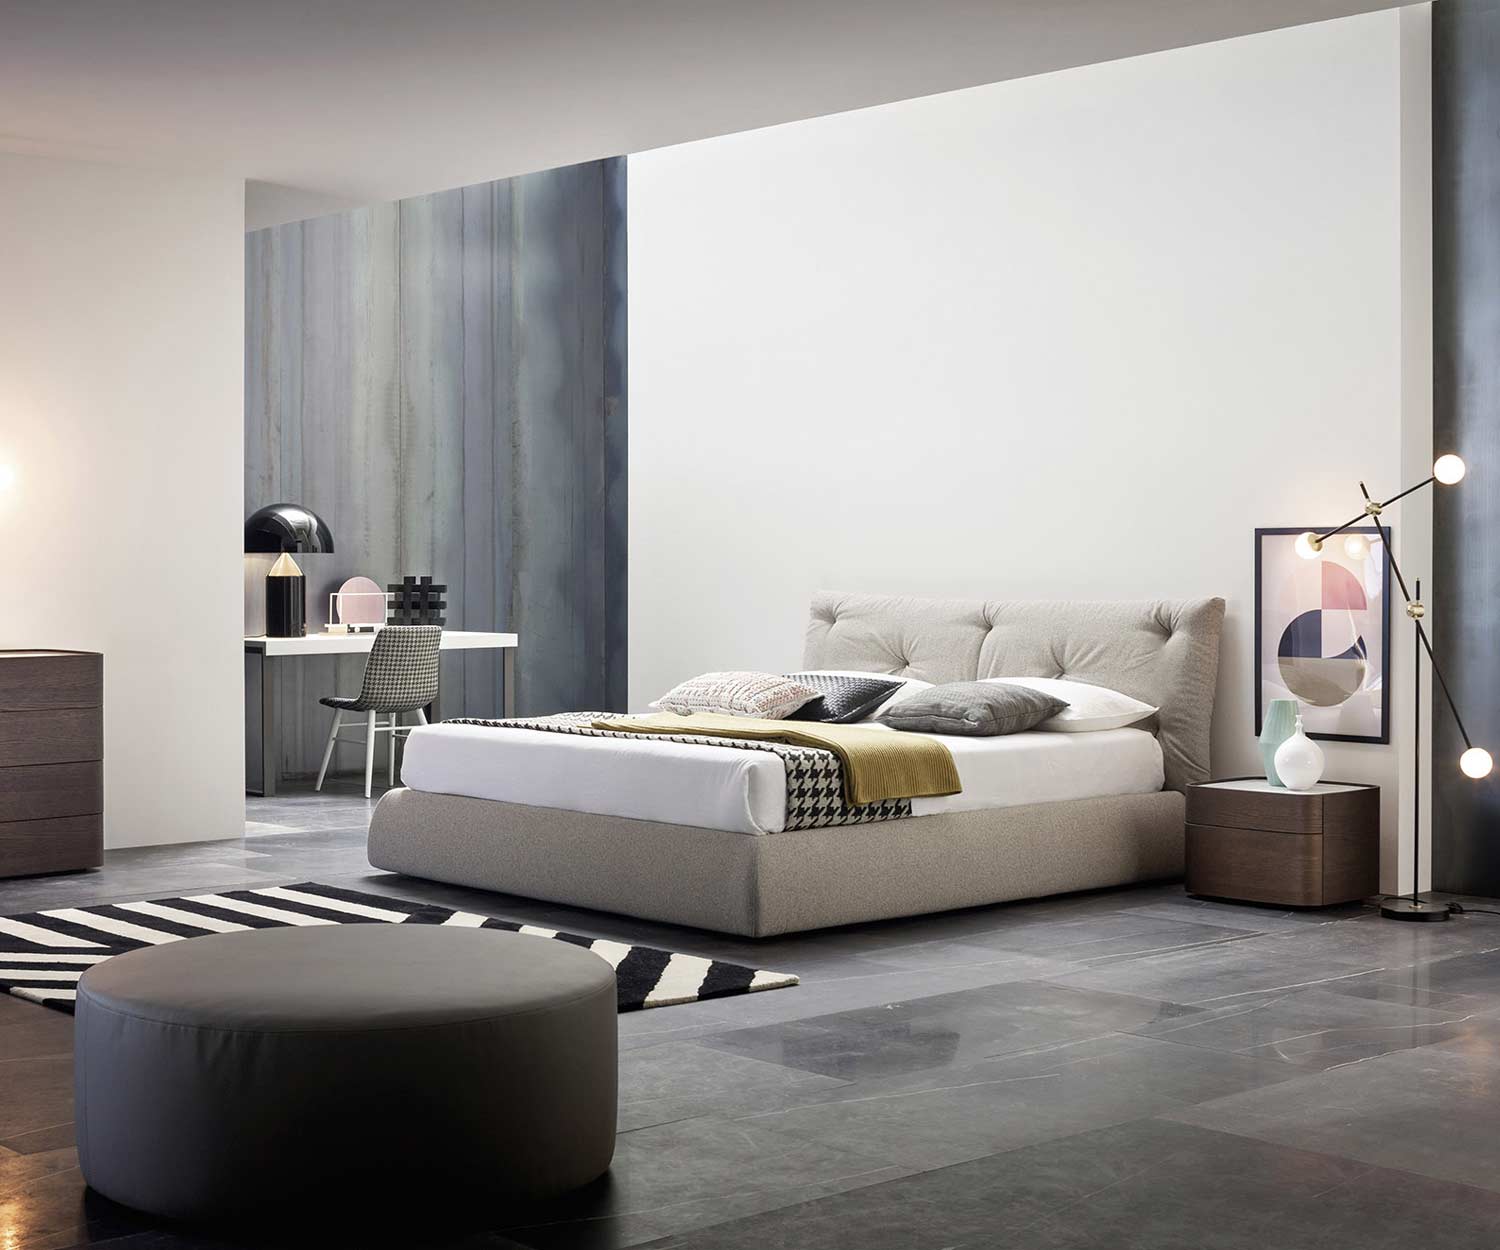 Novamobili Modo upholstered bed in a room with an emotional atmosphere